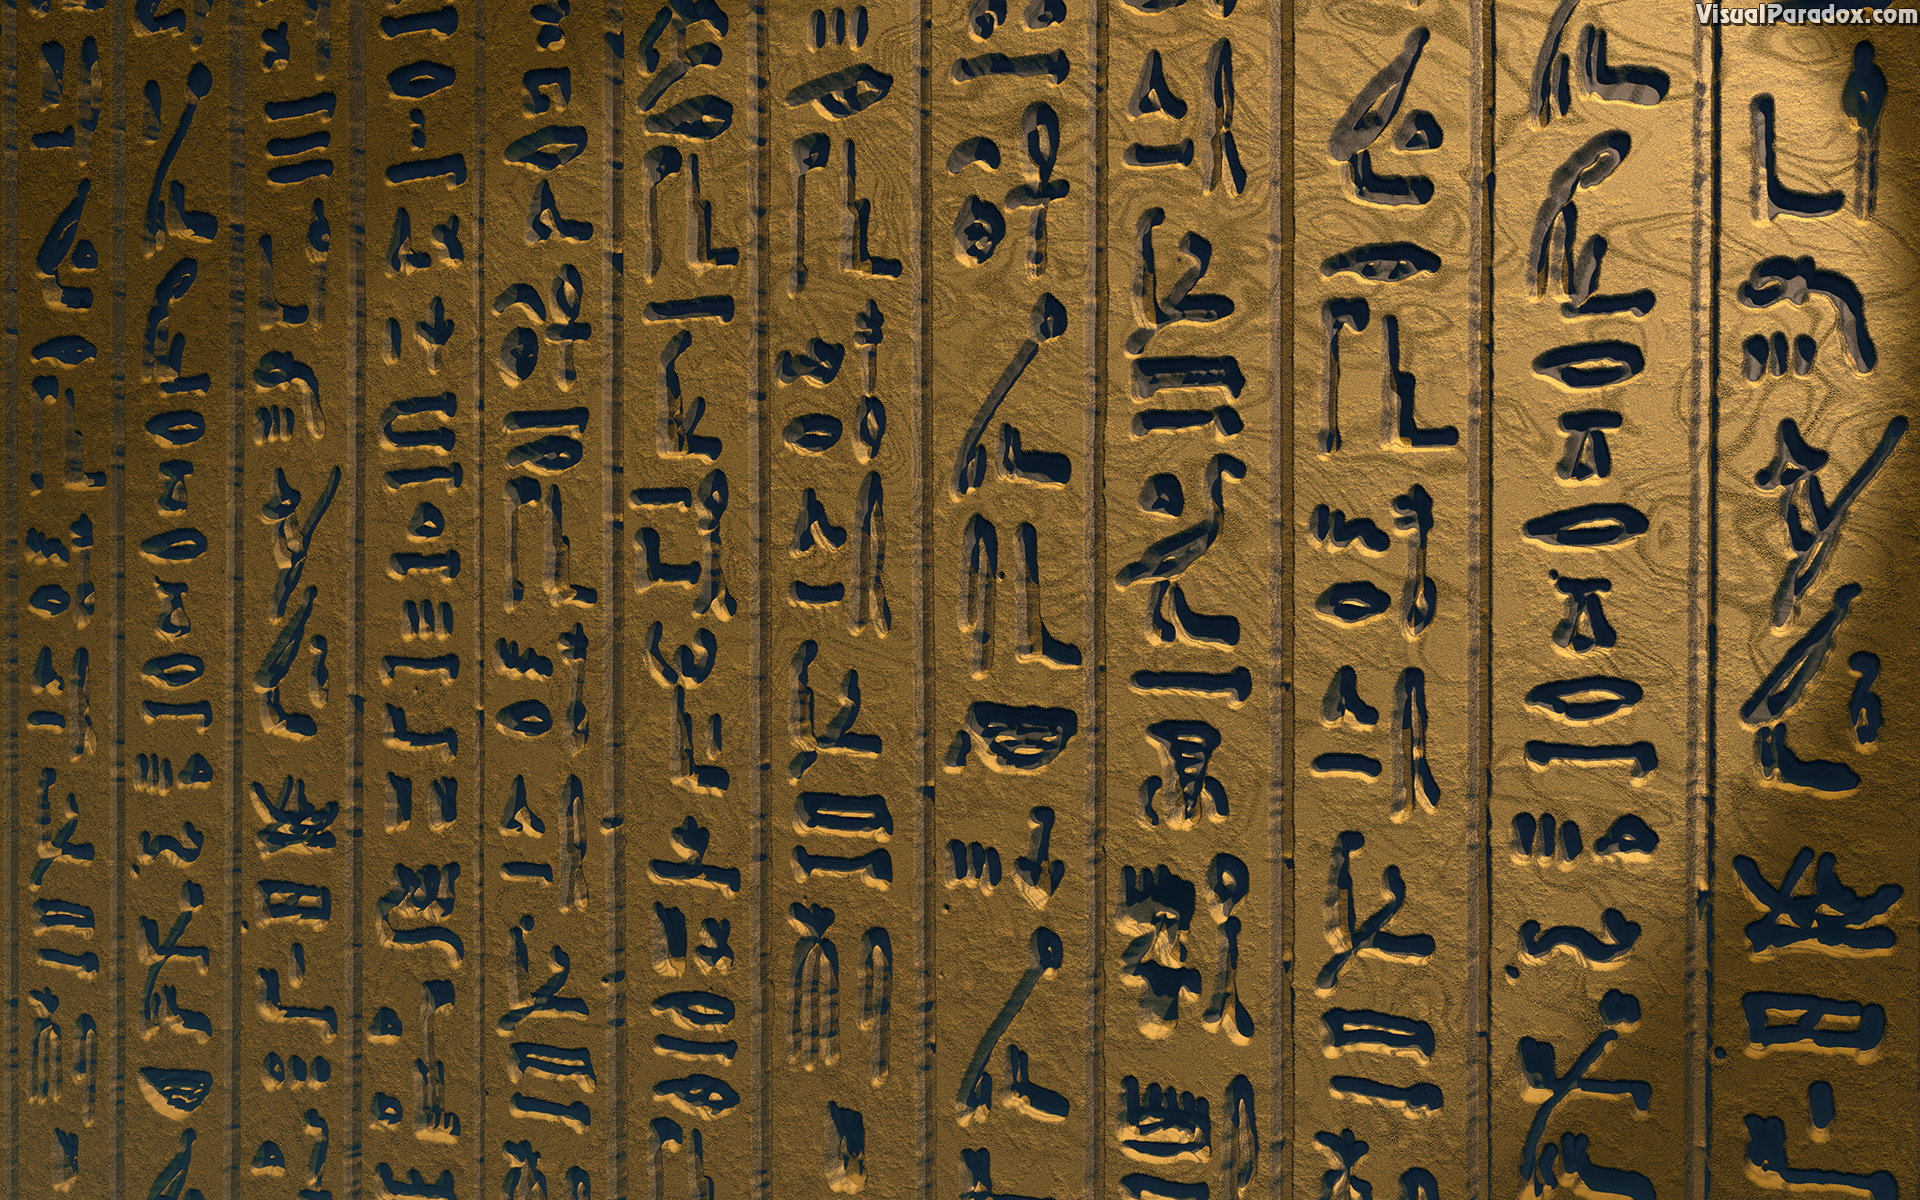 africa, alphabet, ancient, antique, archaeology, architecture, art, attraction, background, brown, building, carving, civilization, close, culture, curse, egypt, egyptian, god, hieroglyph, hieroglyphic, hieroglyphics, historic, history, image, inscription, inscriptions, letter, life, light, luxor, old, past, pattern, pharaoh, pharaohs, rock, ruin, sandstone, shape, sign, stone, symbol, symbols, temple, text, texture, tourism, tourist, traditional, travel, up, wall, warning, word, writing, 3d, wallpaper